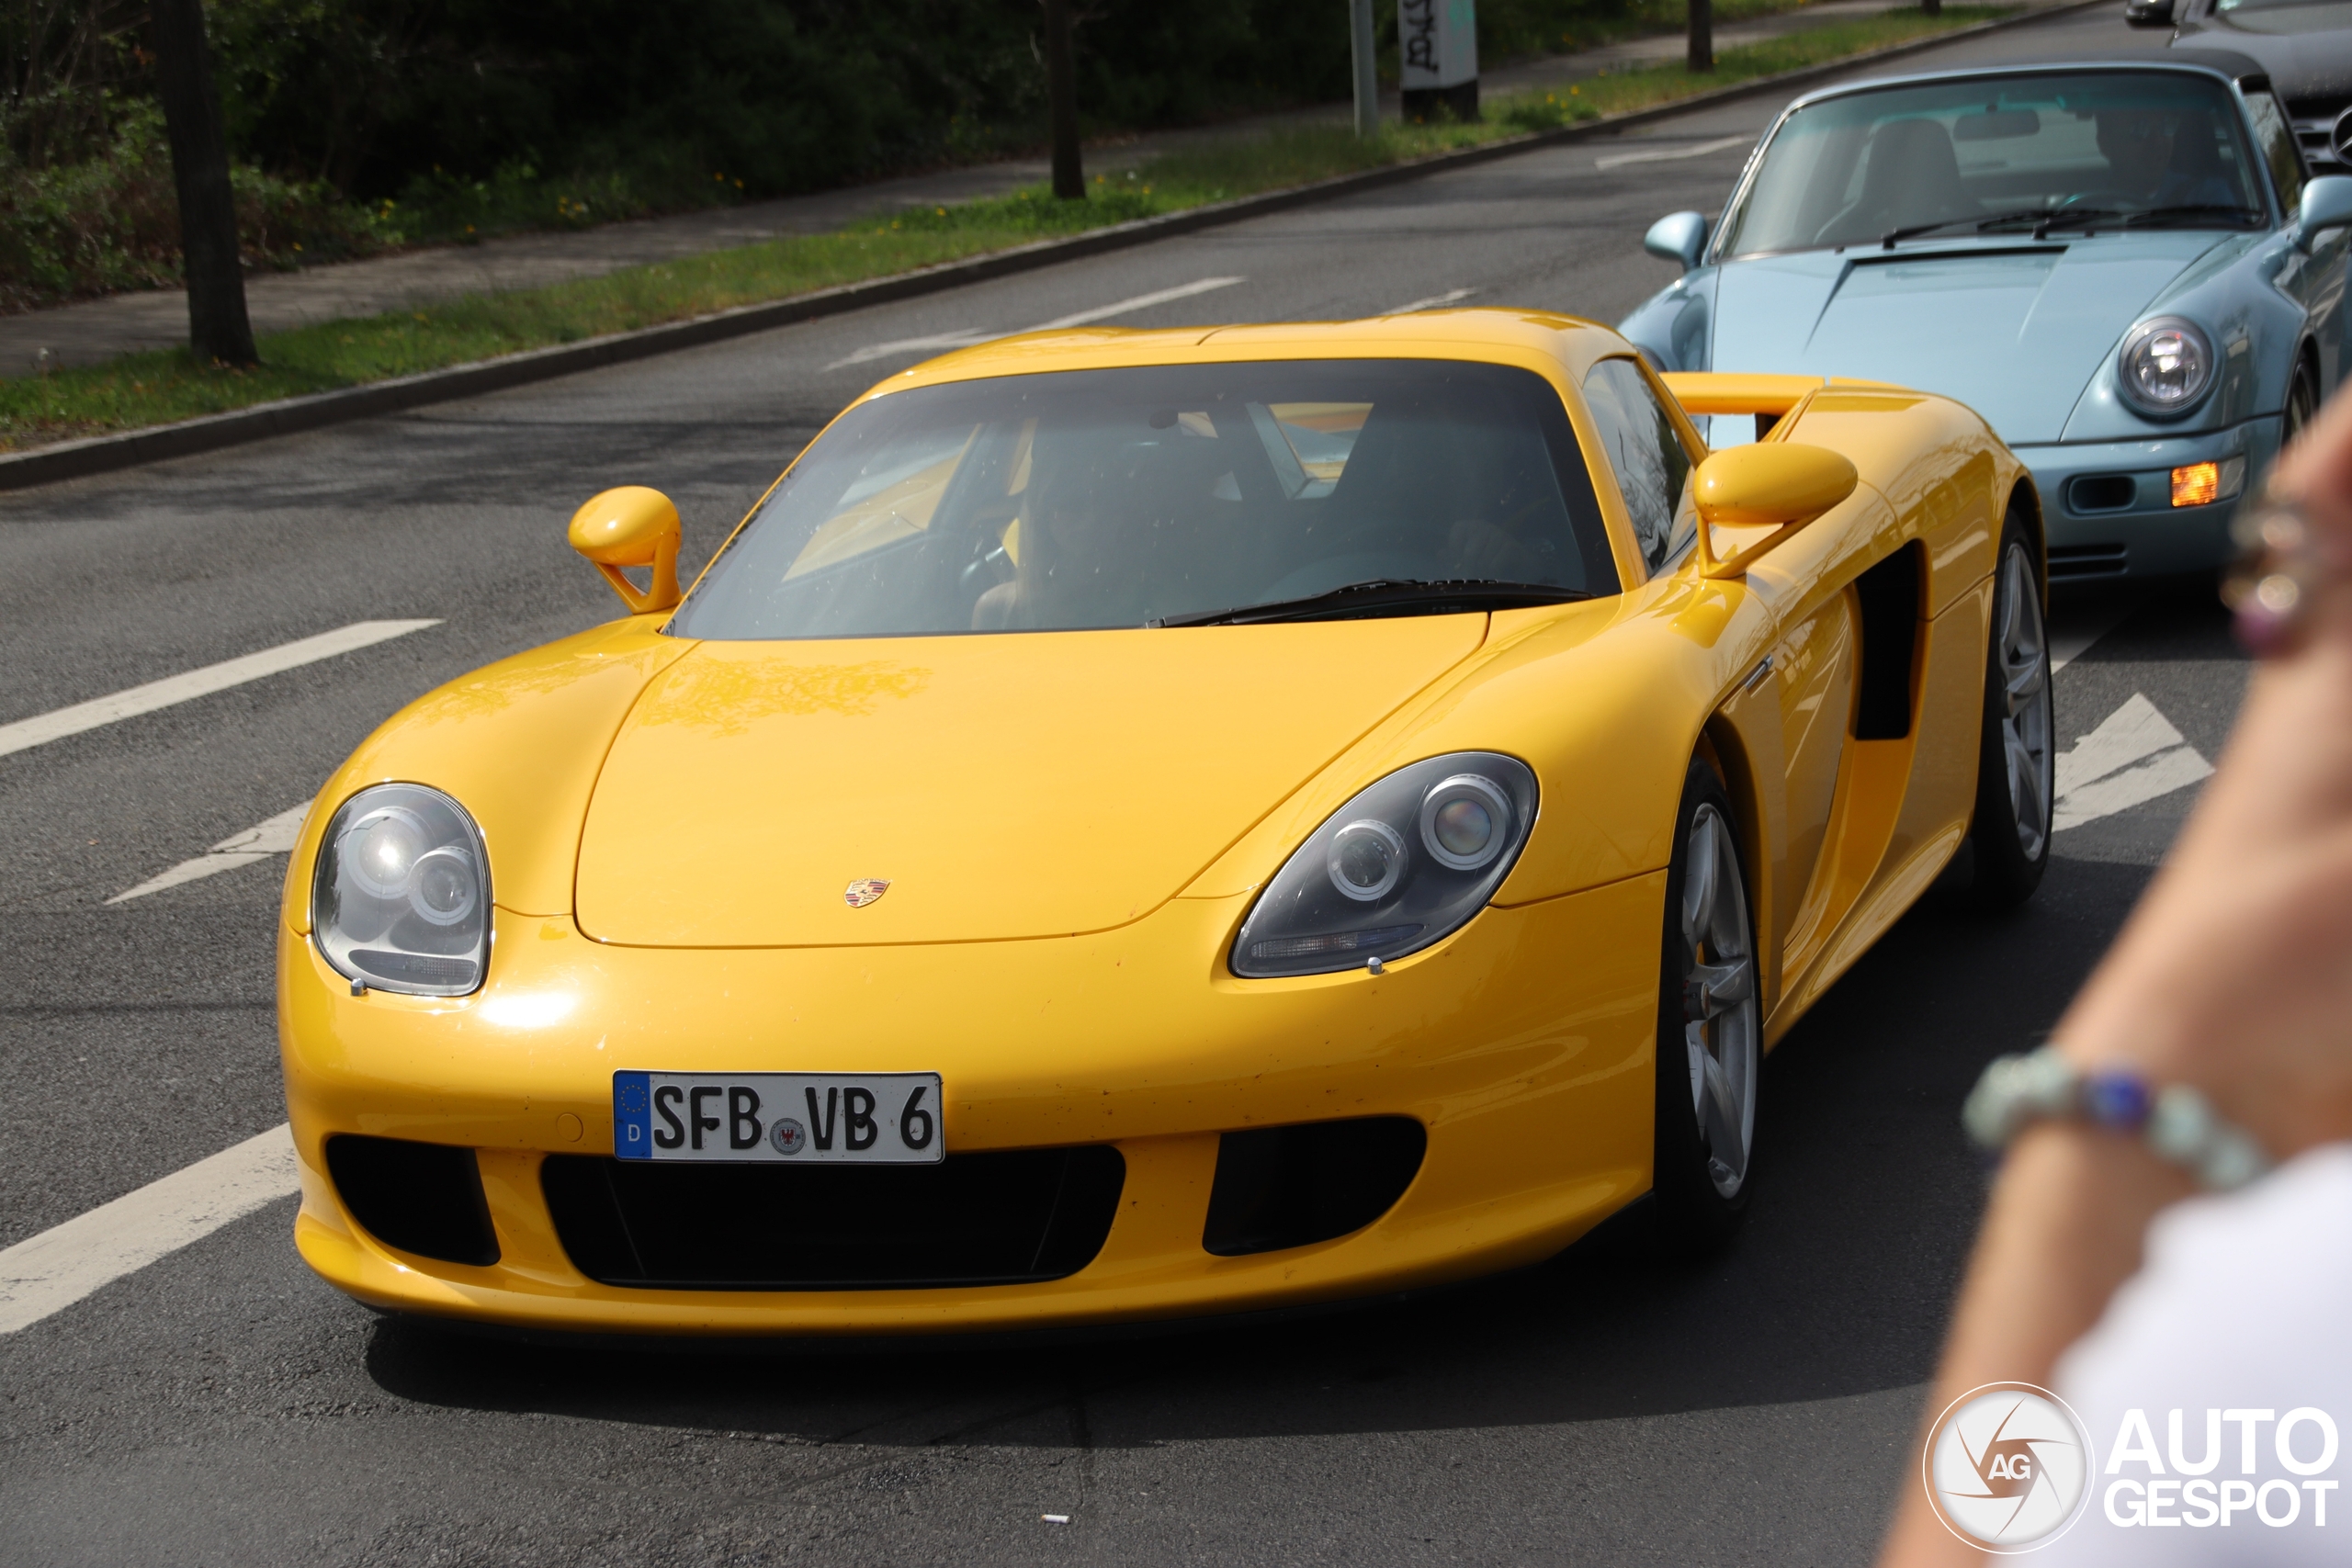 A yellow Carrera GT shows up in Dresden.